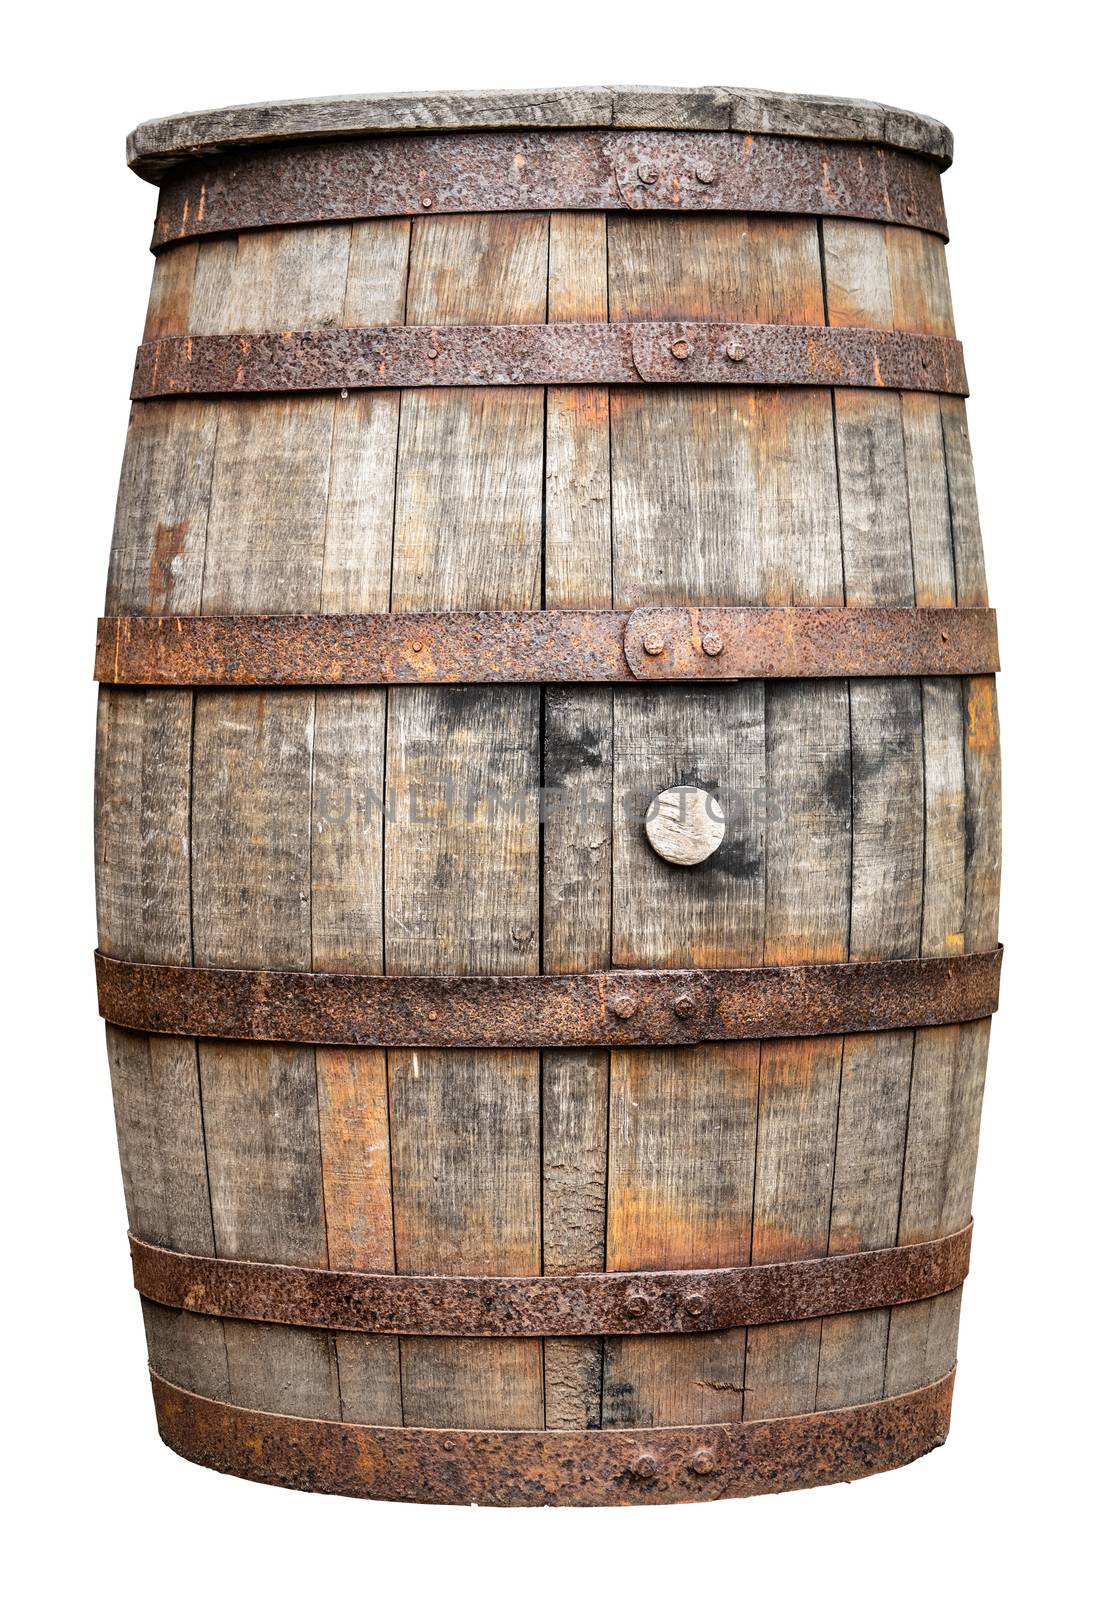 An Isolated Rustic Old Beer, Wine, Whiskey, Rum Or Brandy Barrel Or Cask On A White Background